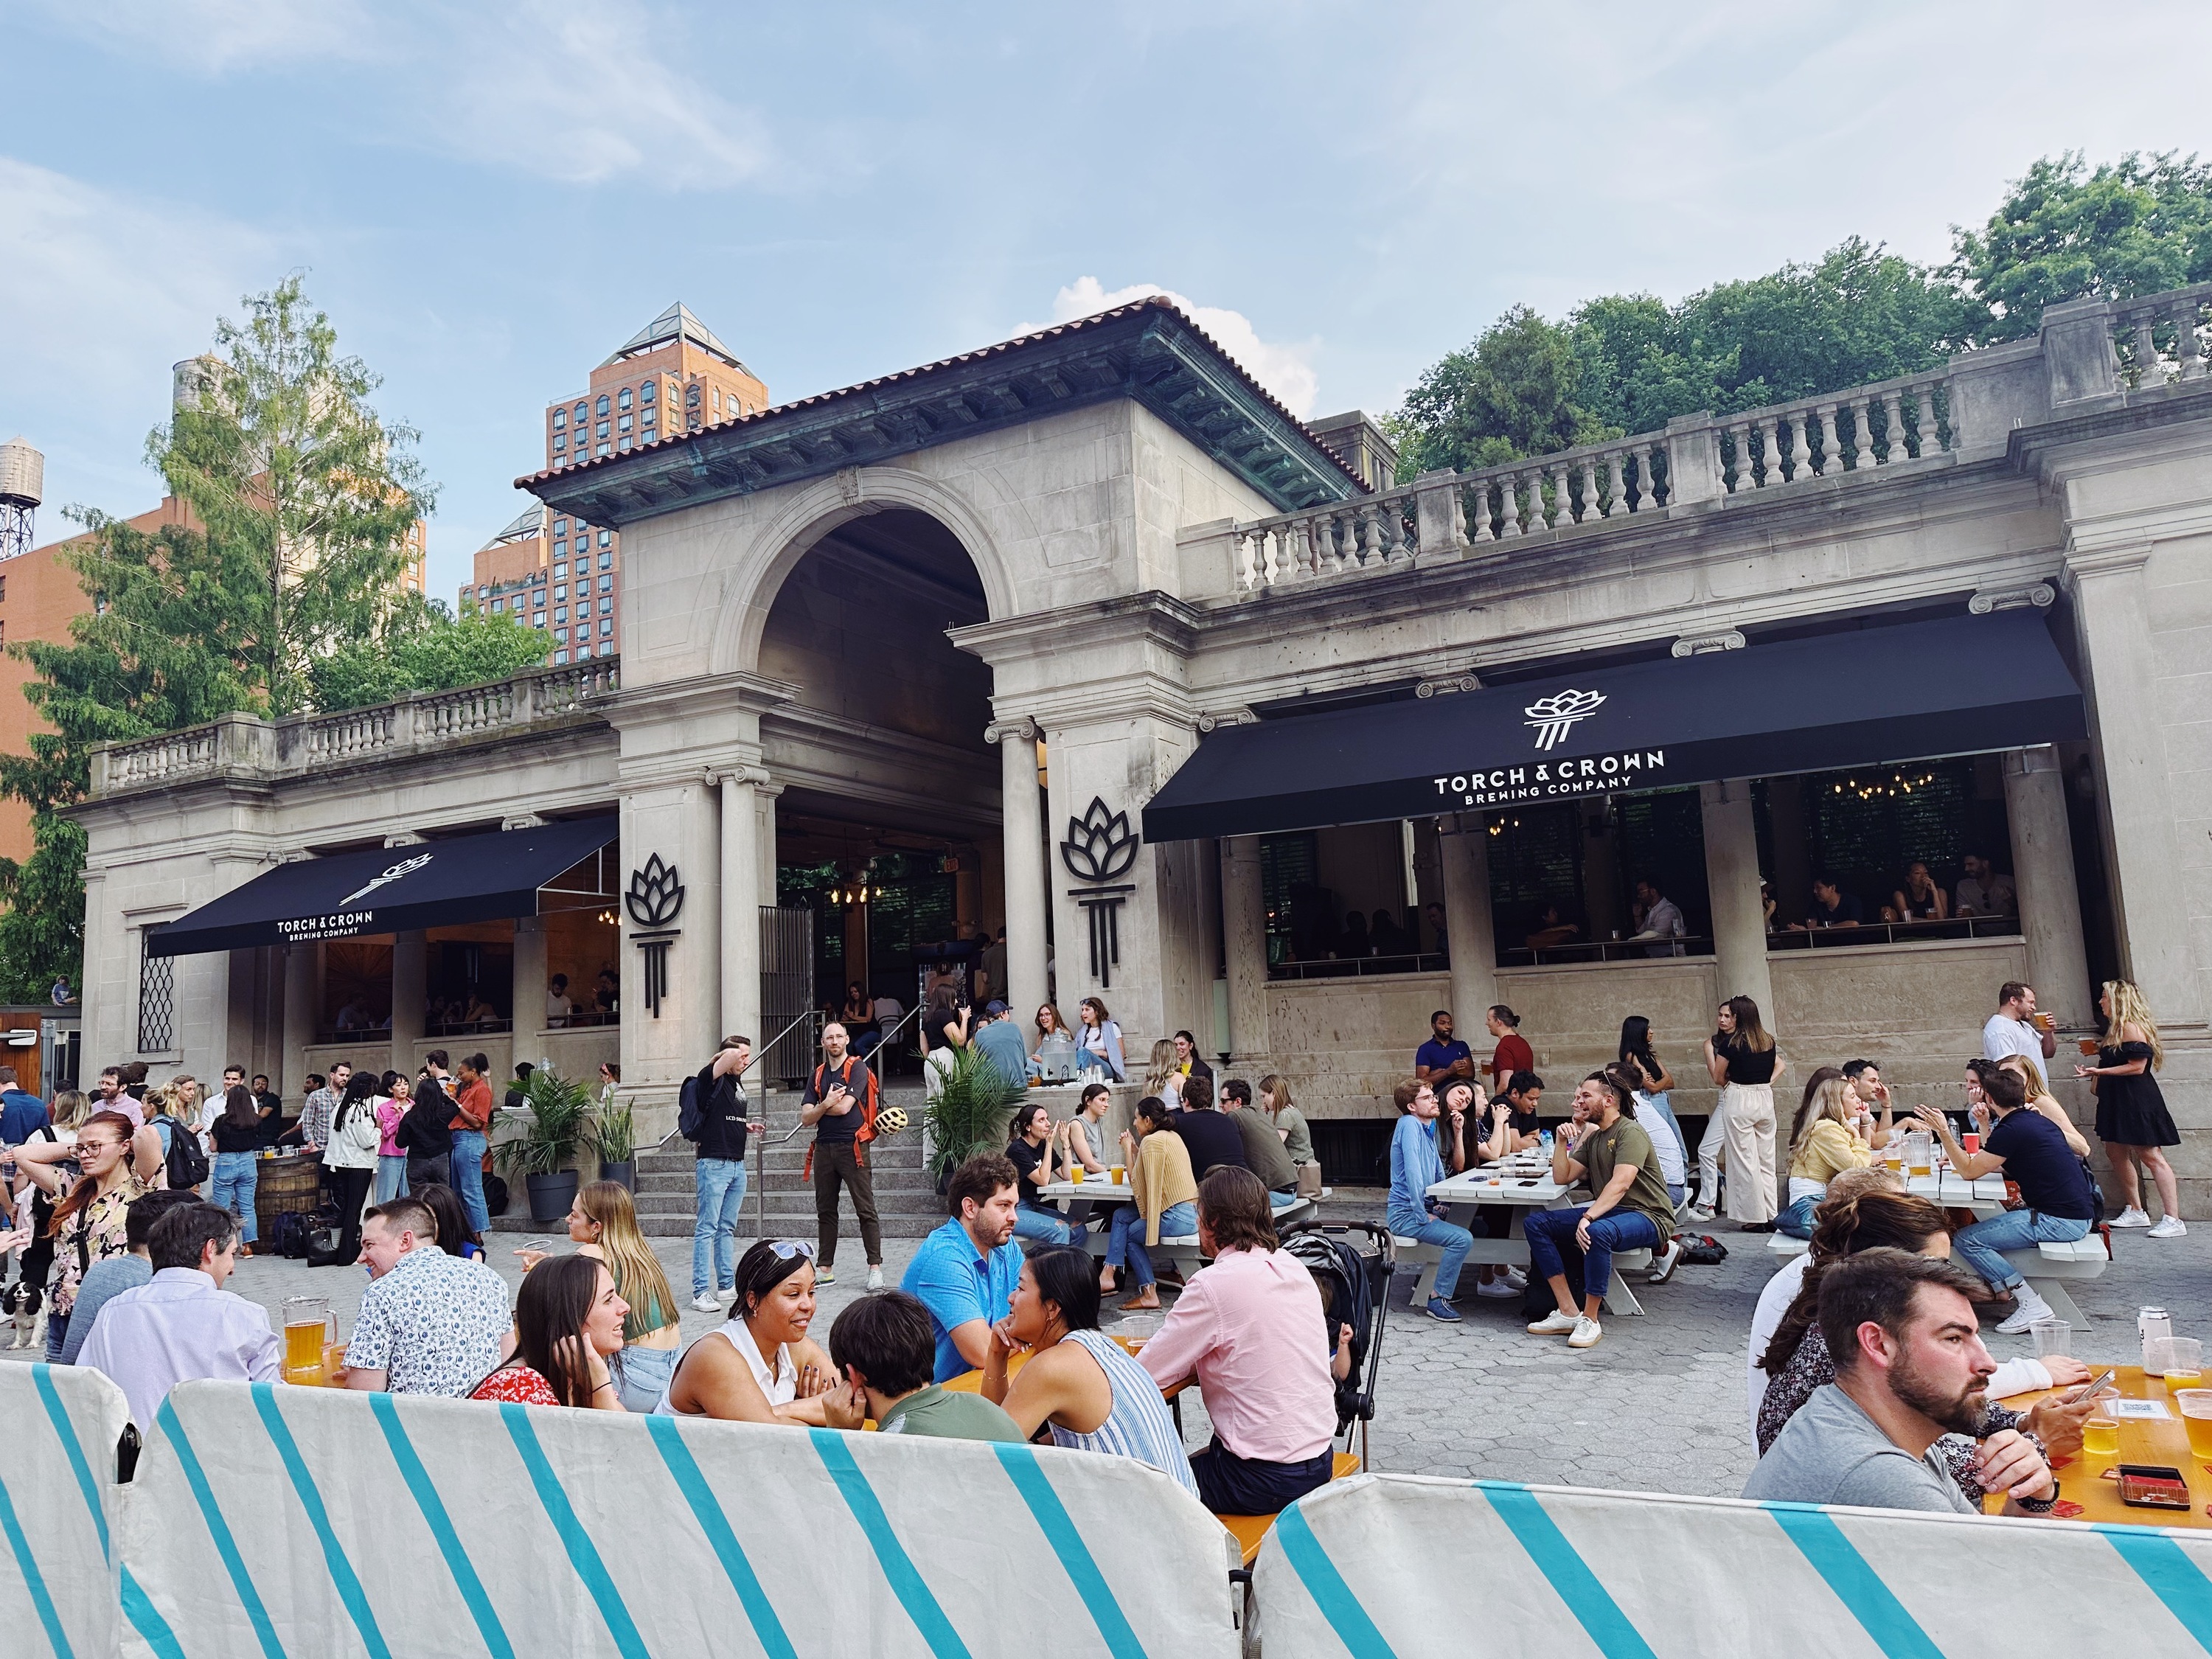 Torch & Crown is back pouring beers in Union Square for summer